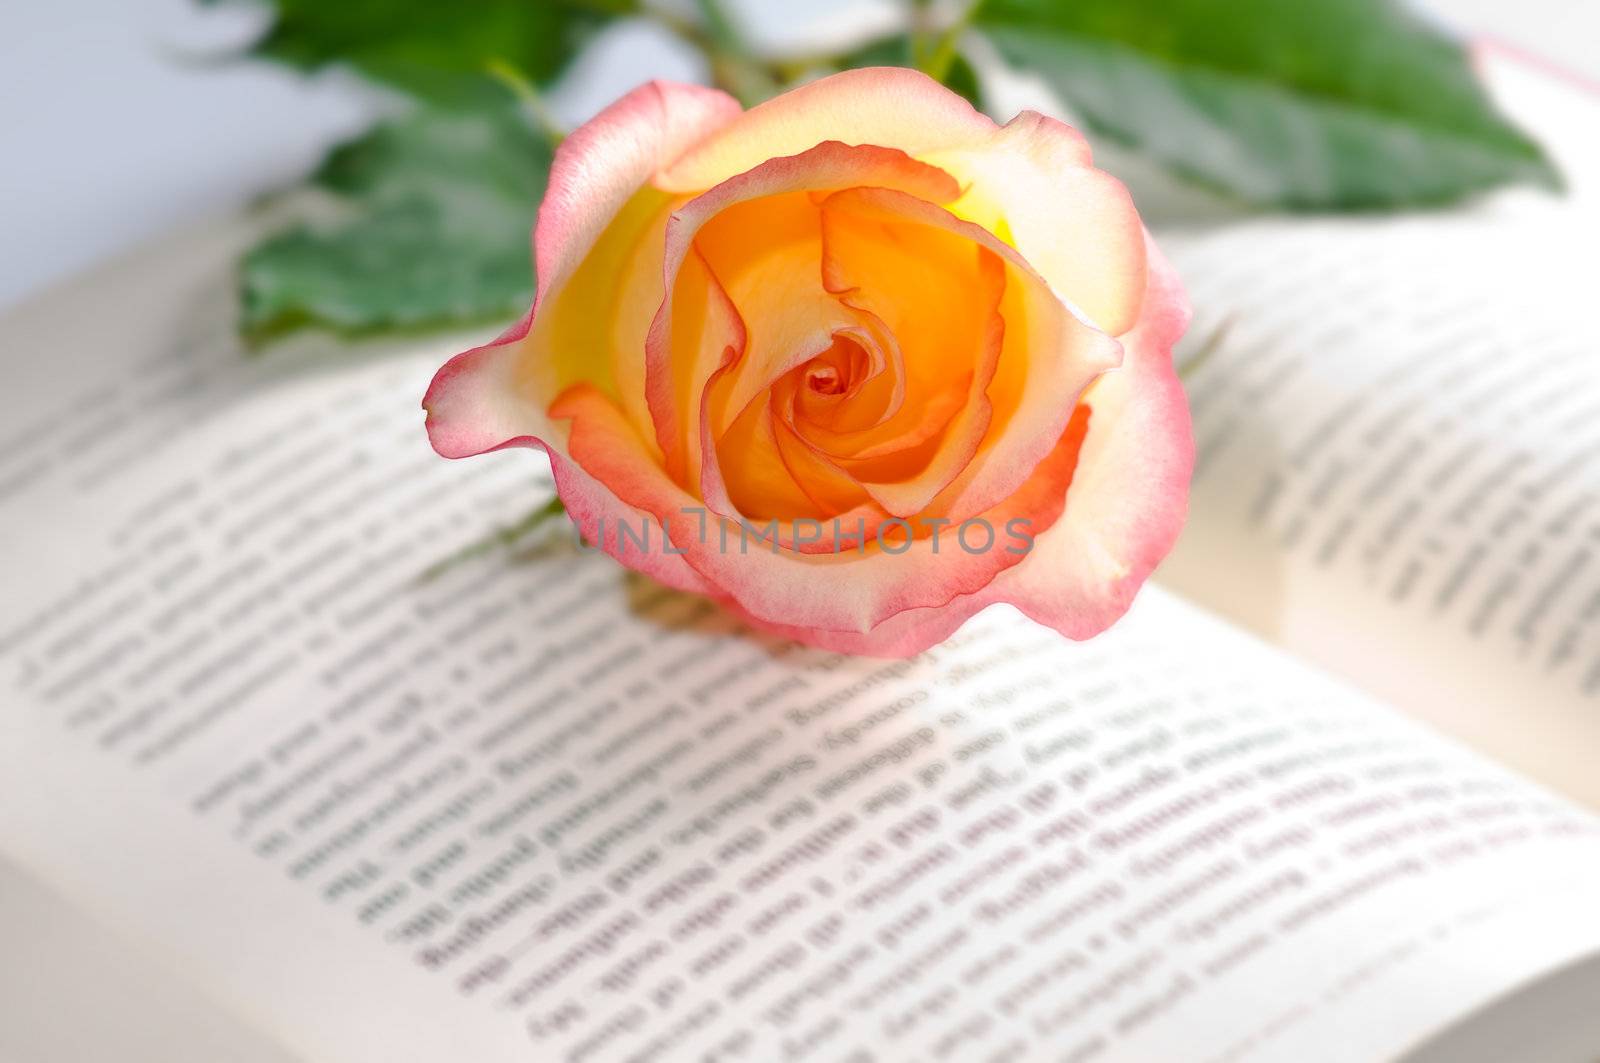 Red yellow rose with a nice blossom over a book